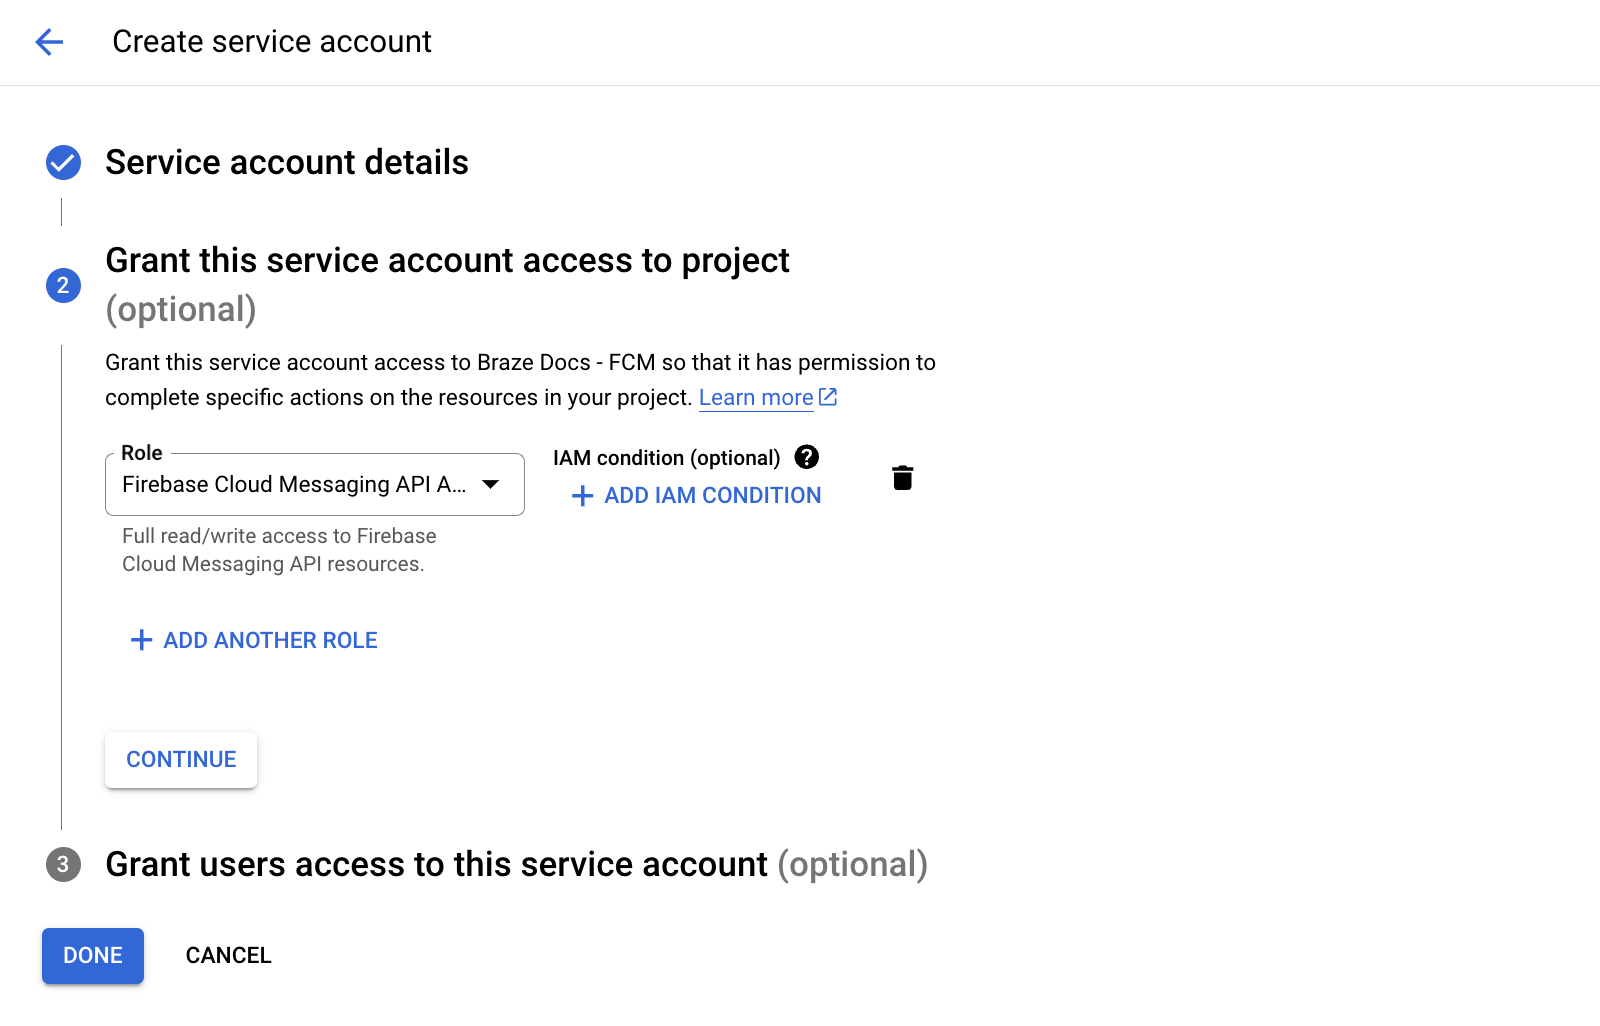 The form for "Grant this service account access to project" with "Firebase Cloud Messaging API Admin" selected as the role.